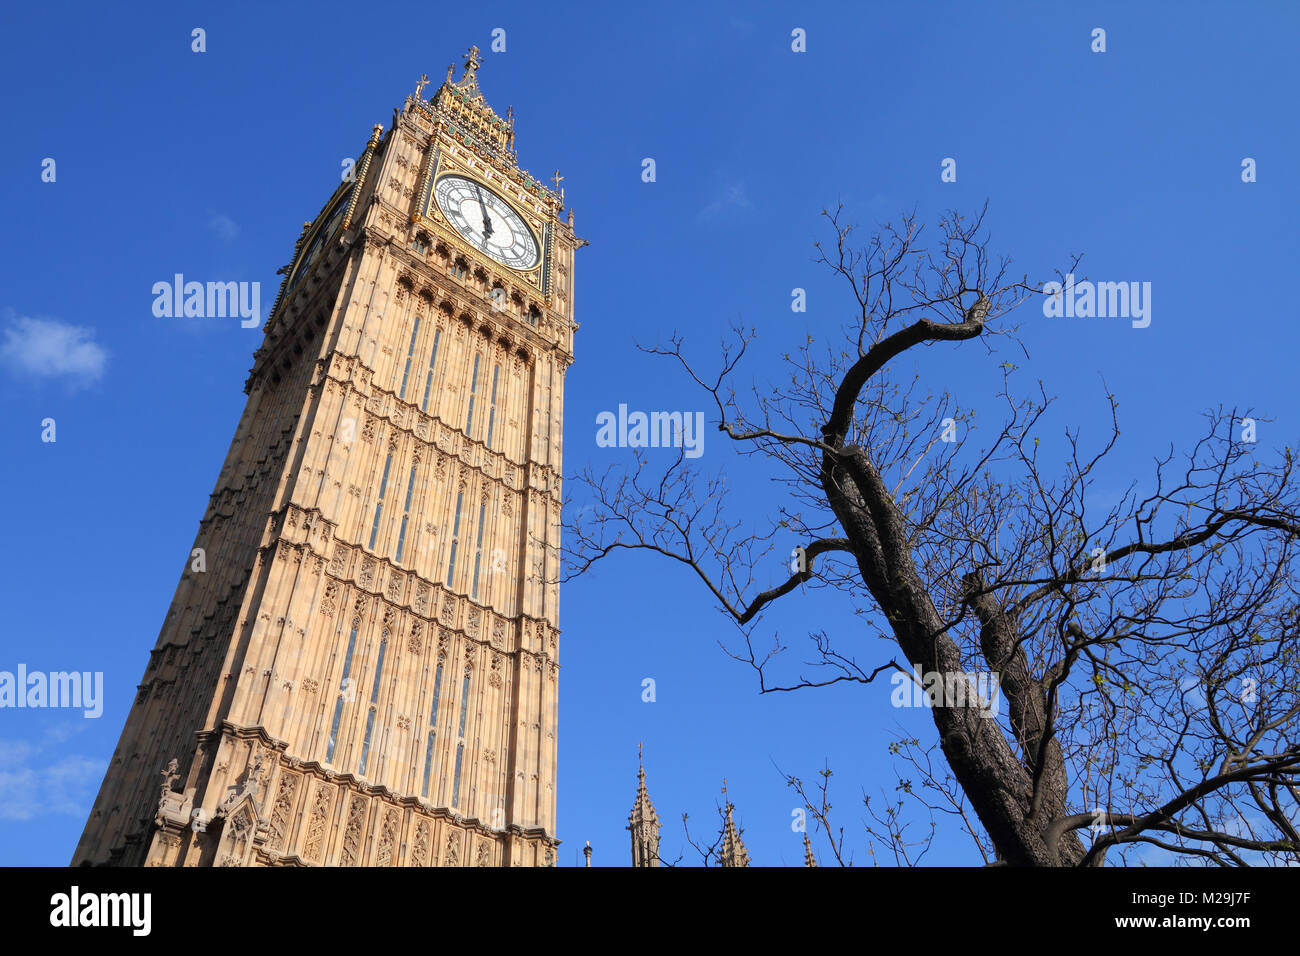 London, United Kingdom - Palace of Westminster (Houses of Parliament) Big Ben clock tower. UNESCO World Heritage Site. Stock Photo